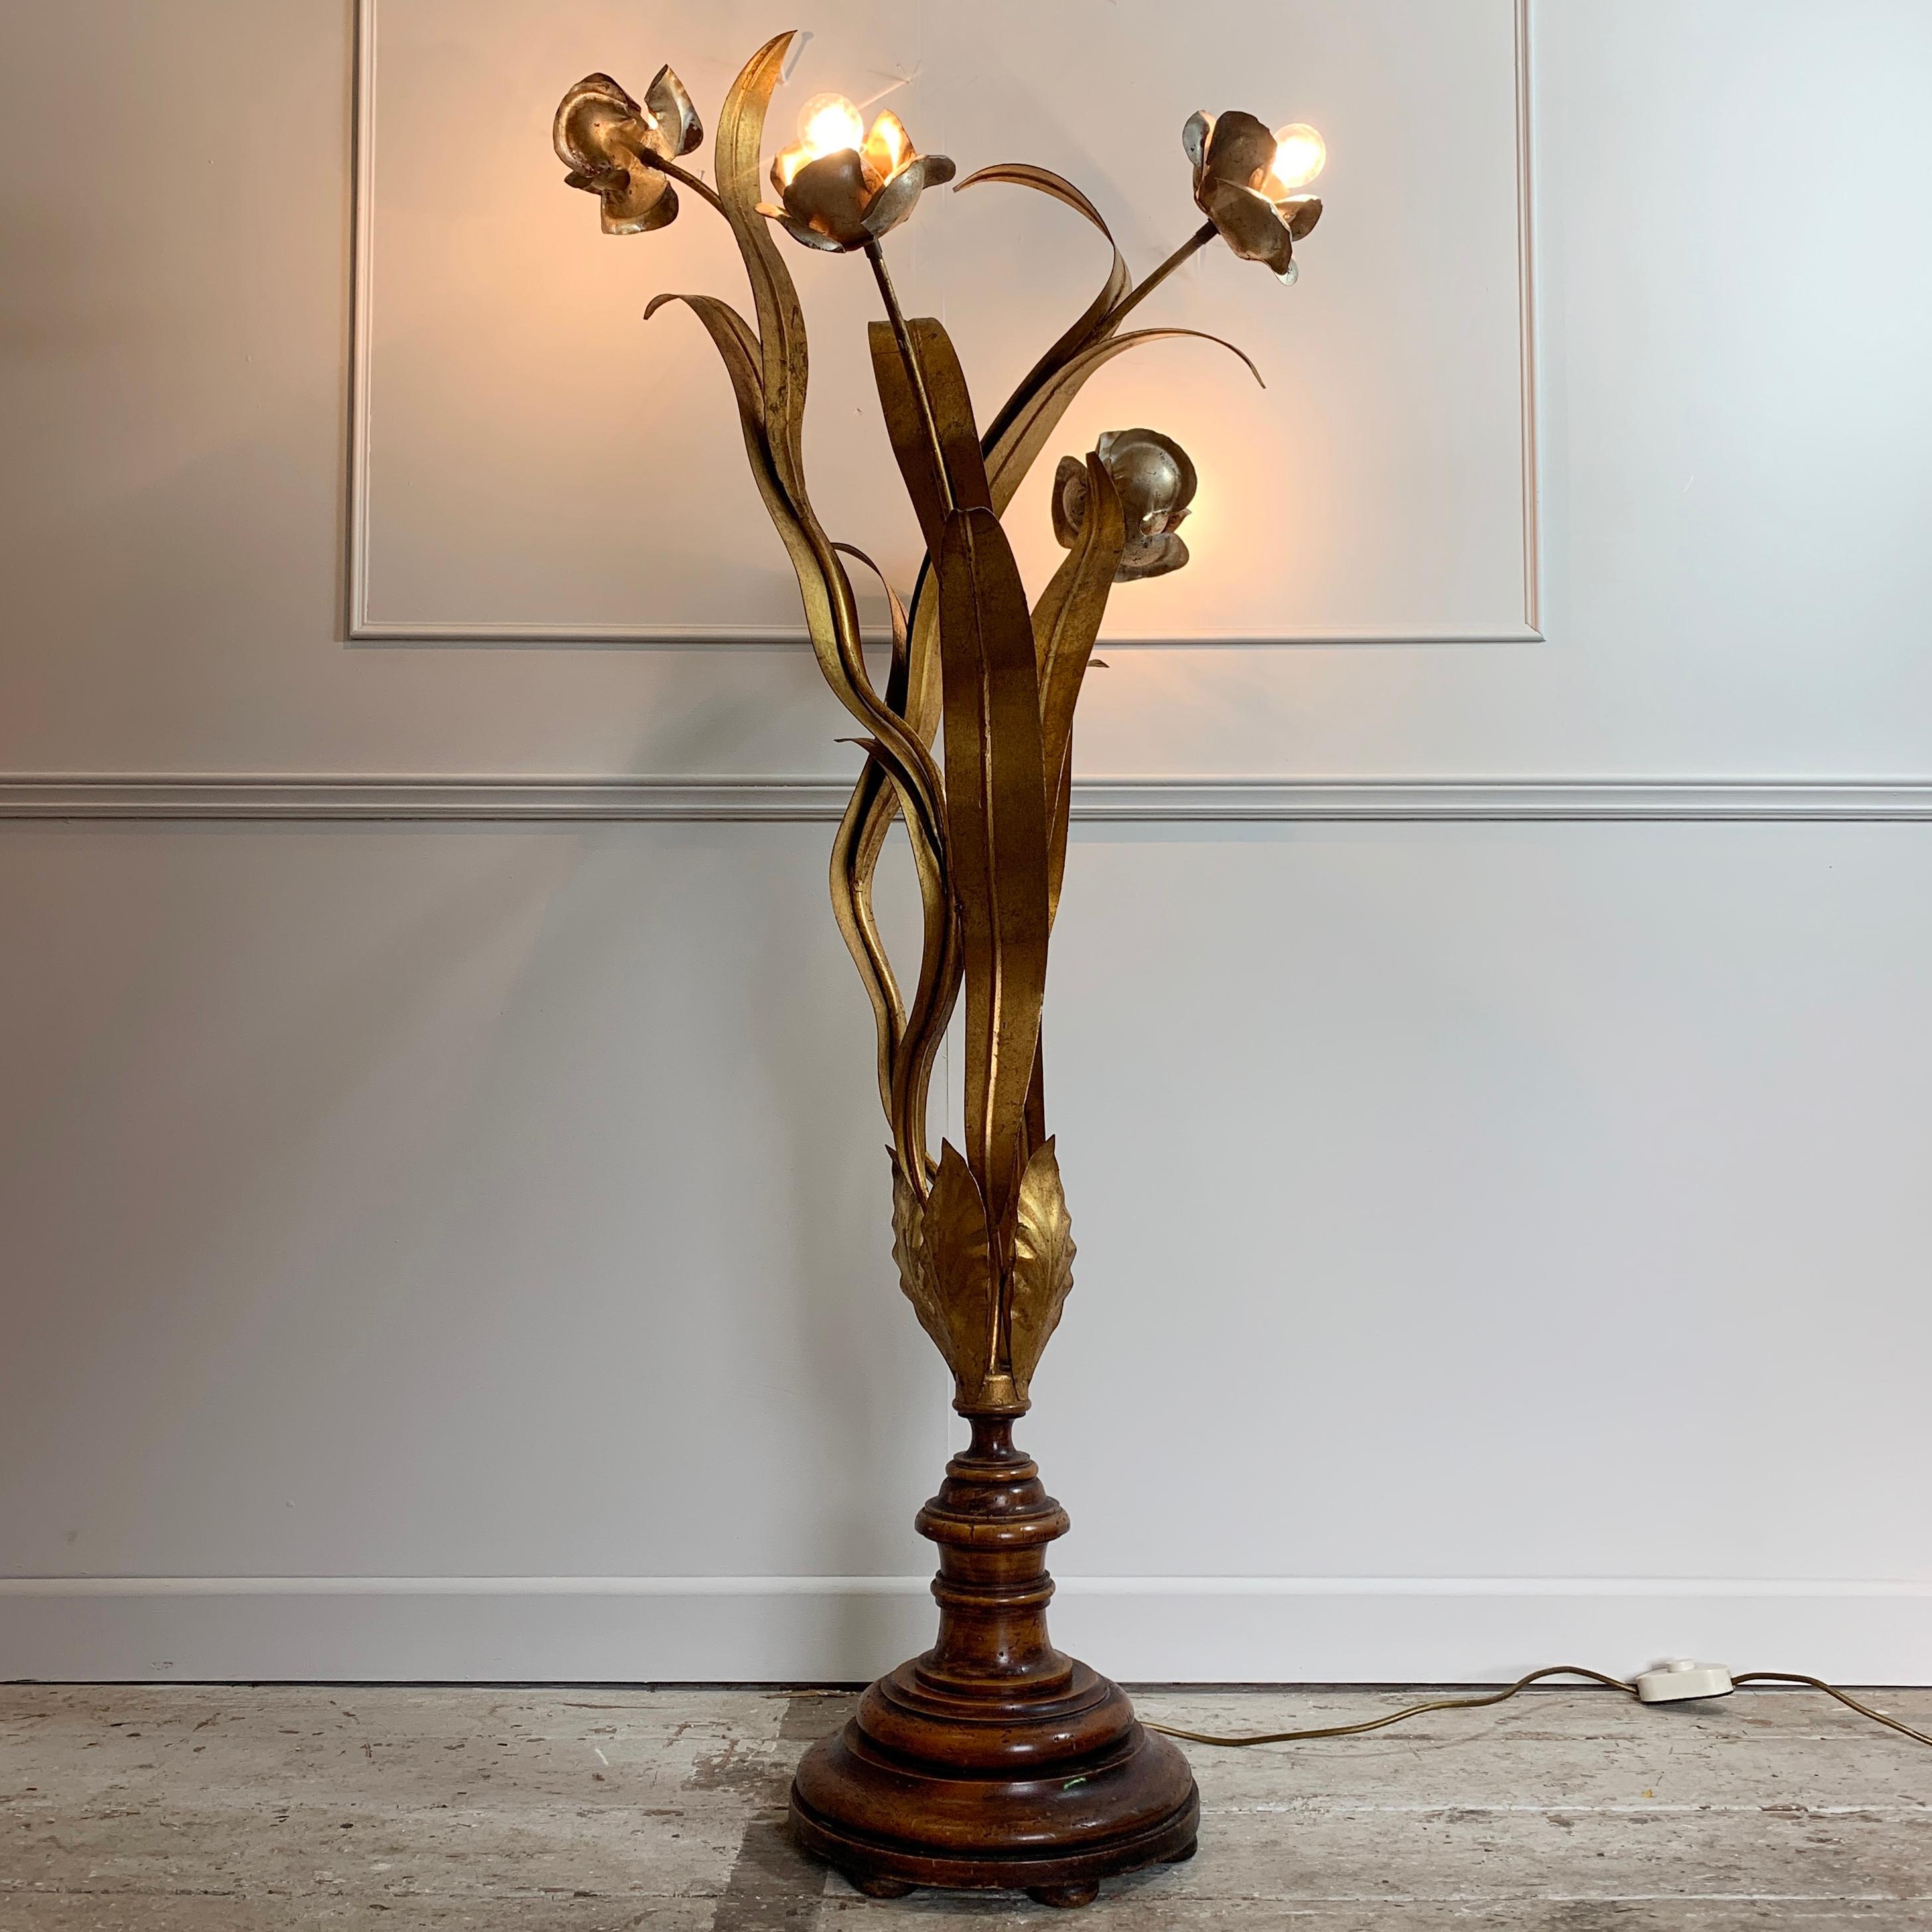 Stunning rare midcentury gilt flower floor lamp
Wide large gold leaves surround 4 stems topped with large silver flowers
Original gold leaf and silver leaf finish to all parts
France, circa 1960s
Beautiful turned wooden base
Measures: 148cm